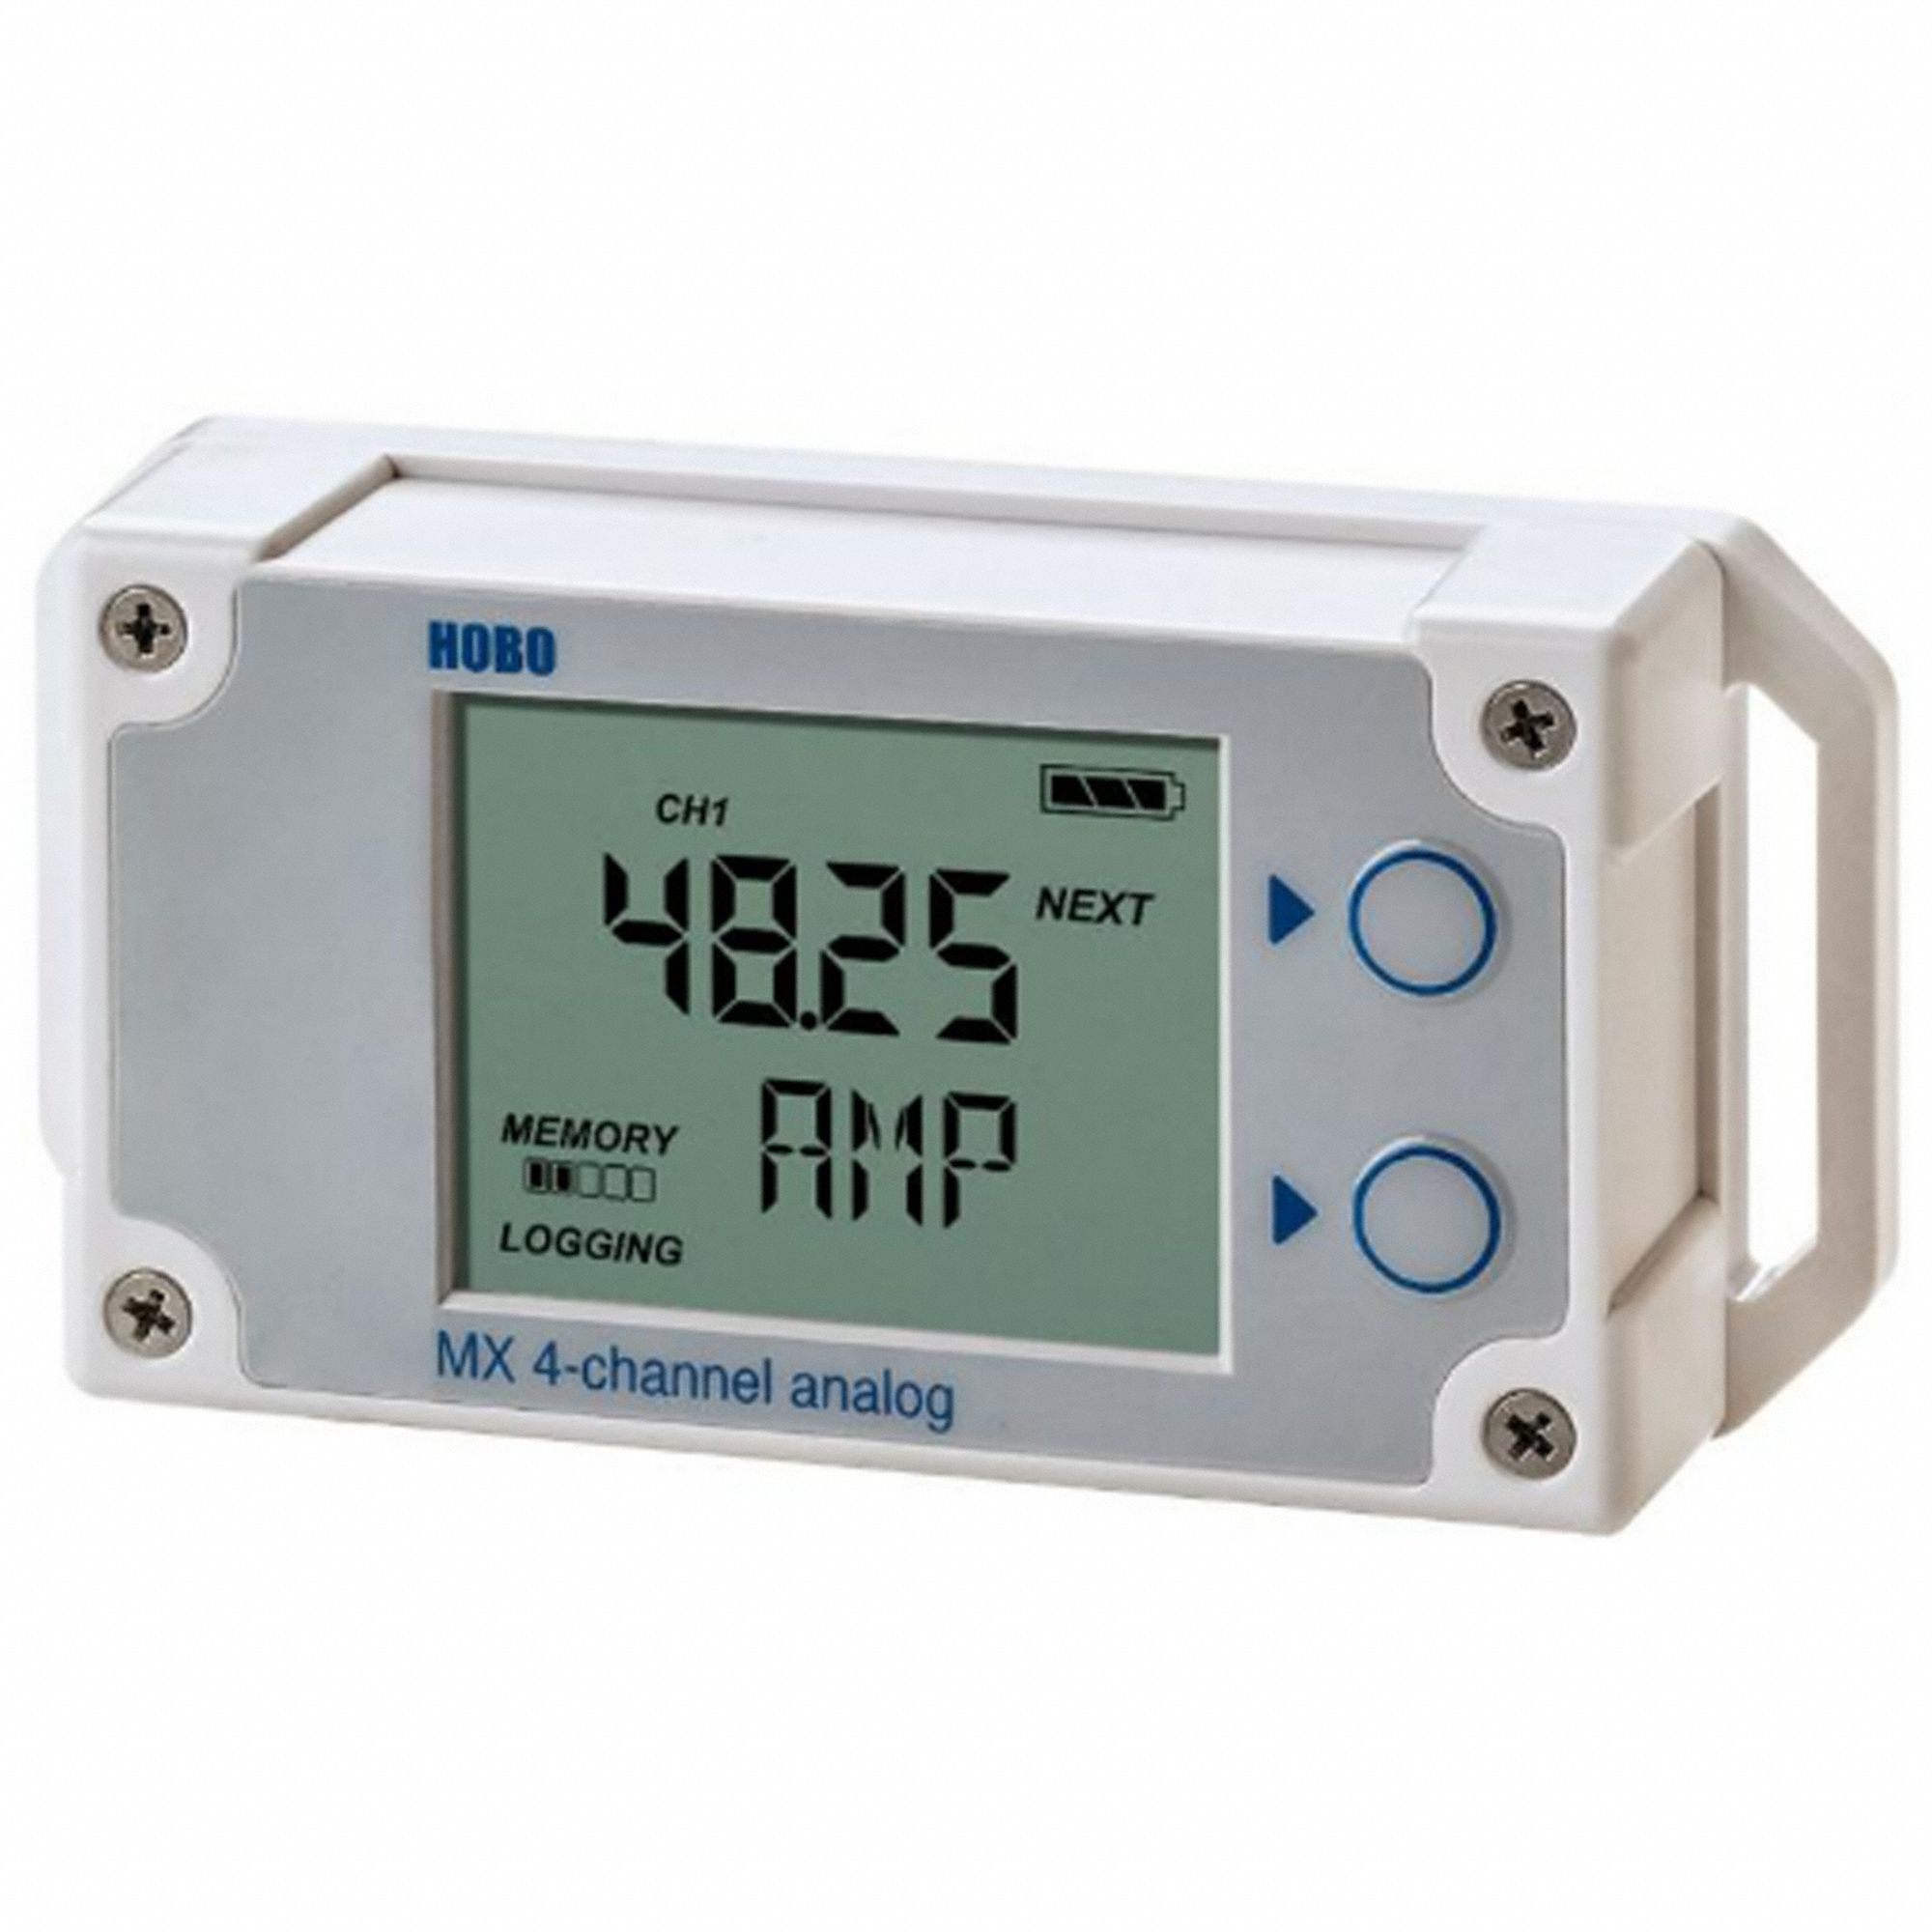 Analog Data Logger 4-Channel: -4° to 158°F, 1 yr Battery Life, LCD